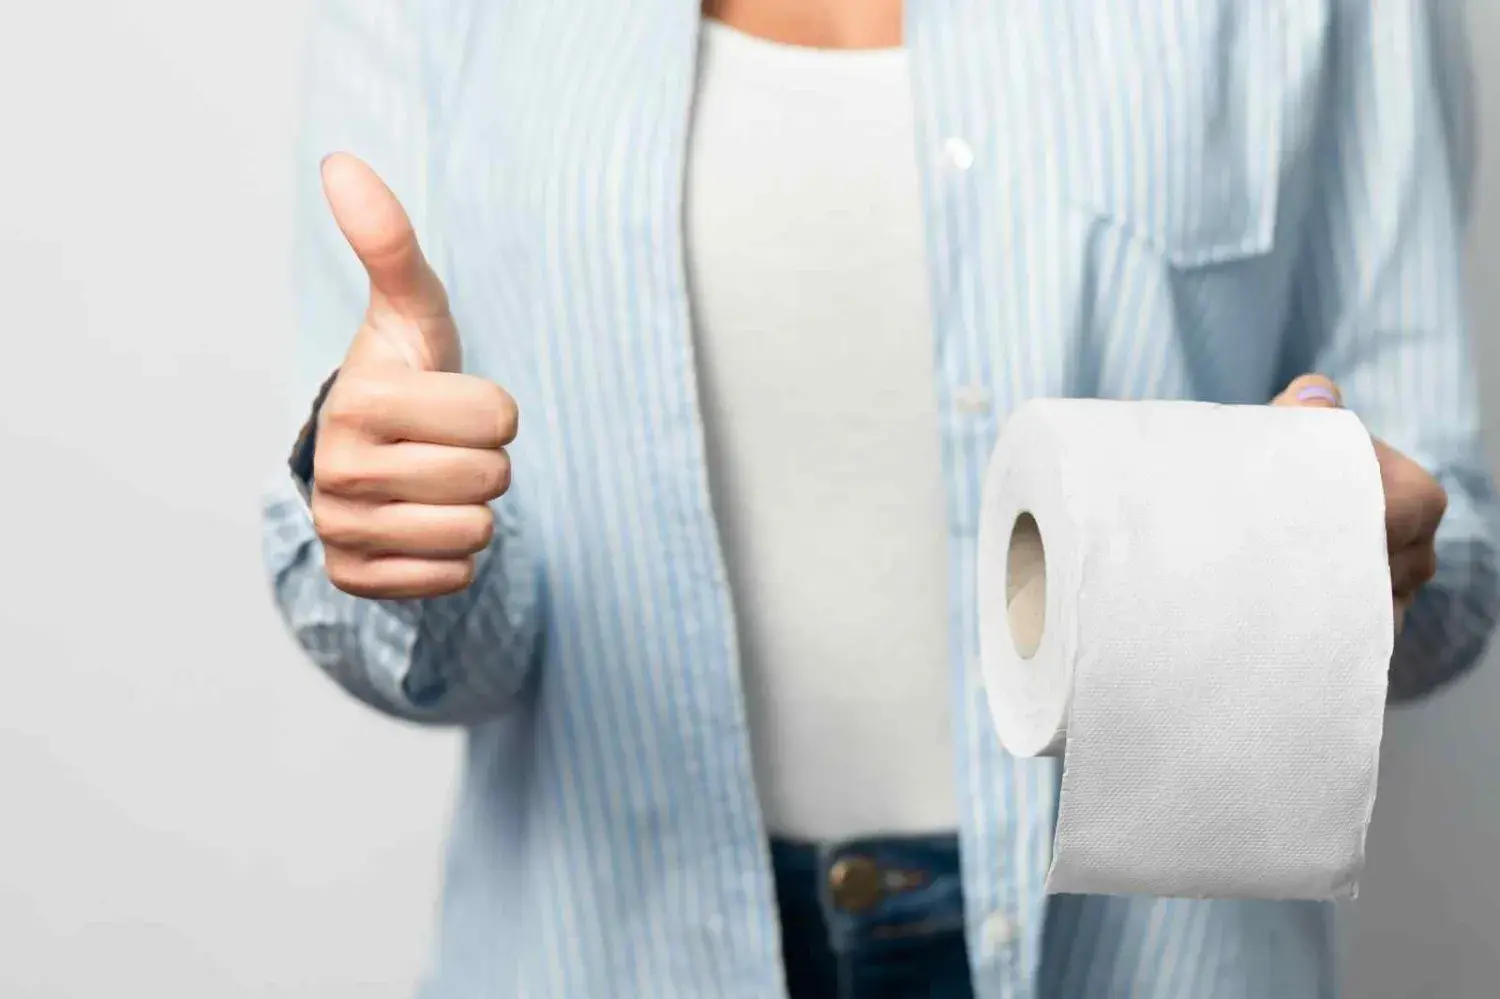 Woman Holding Toilet Paper Gesturing Thumbs-Up